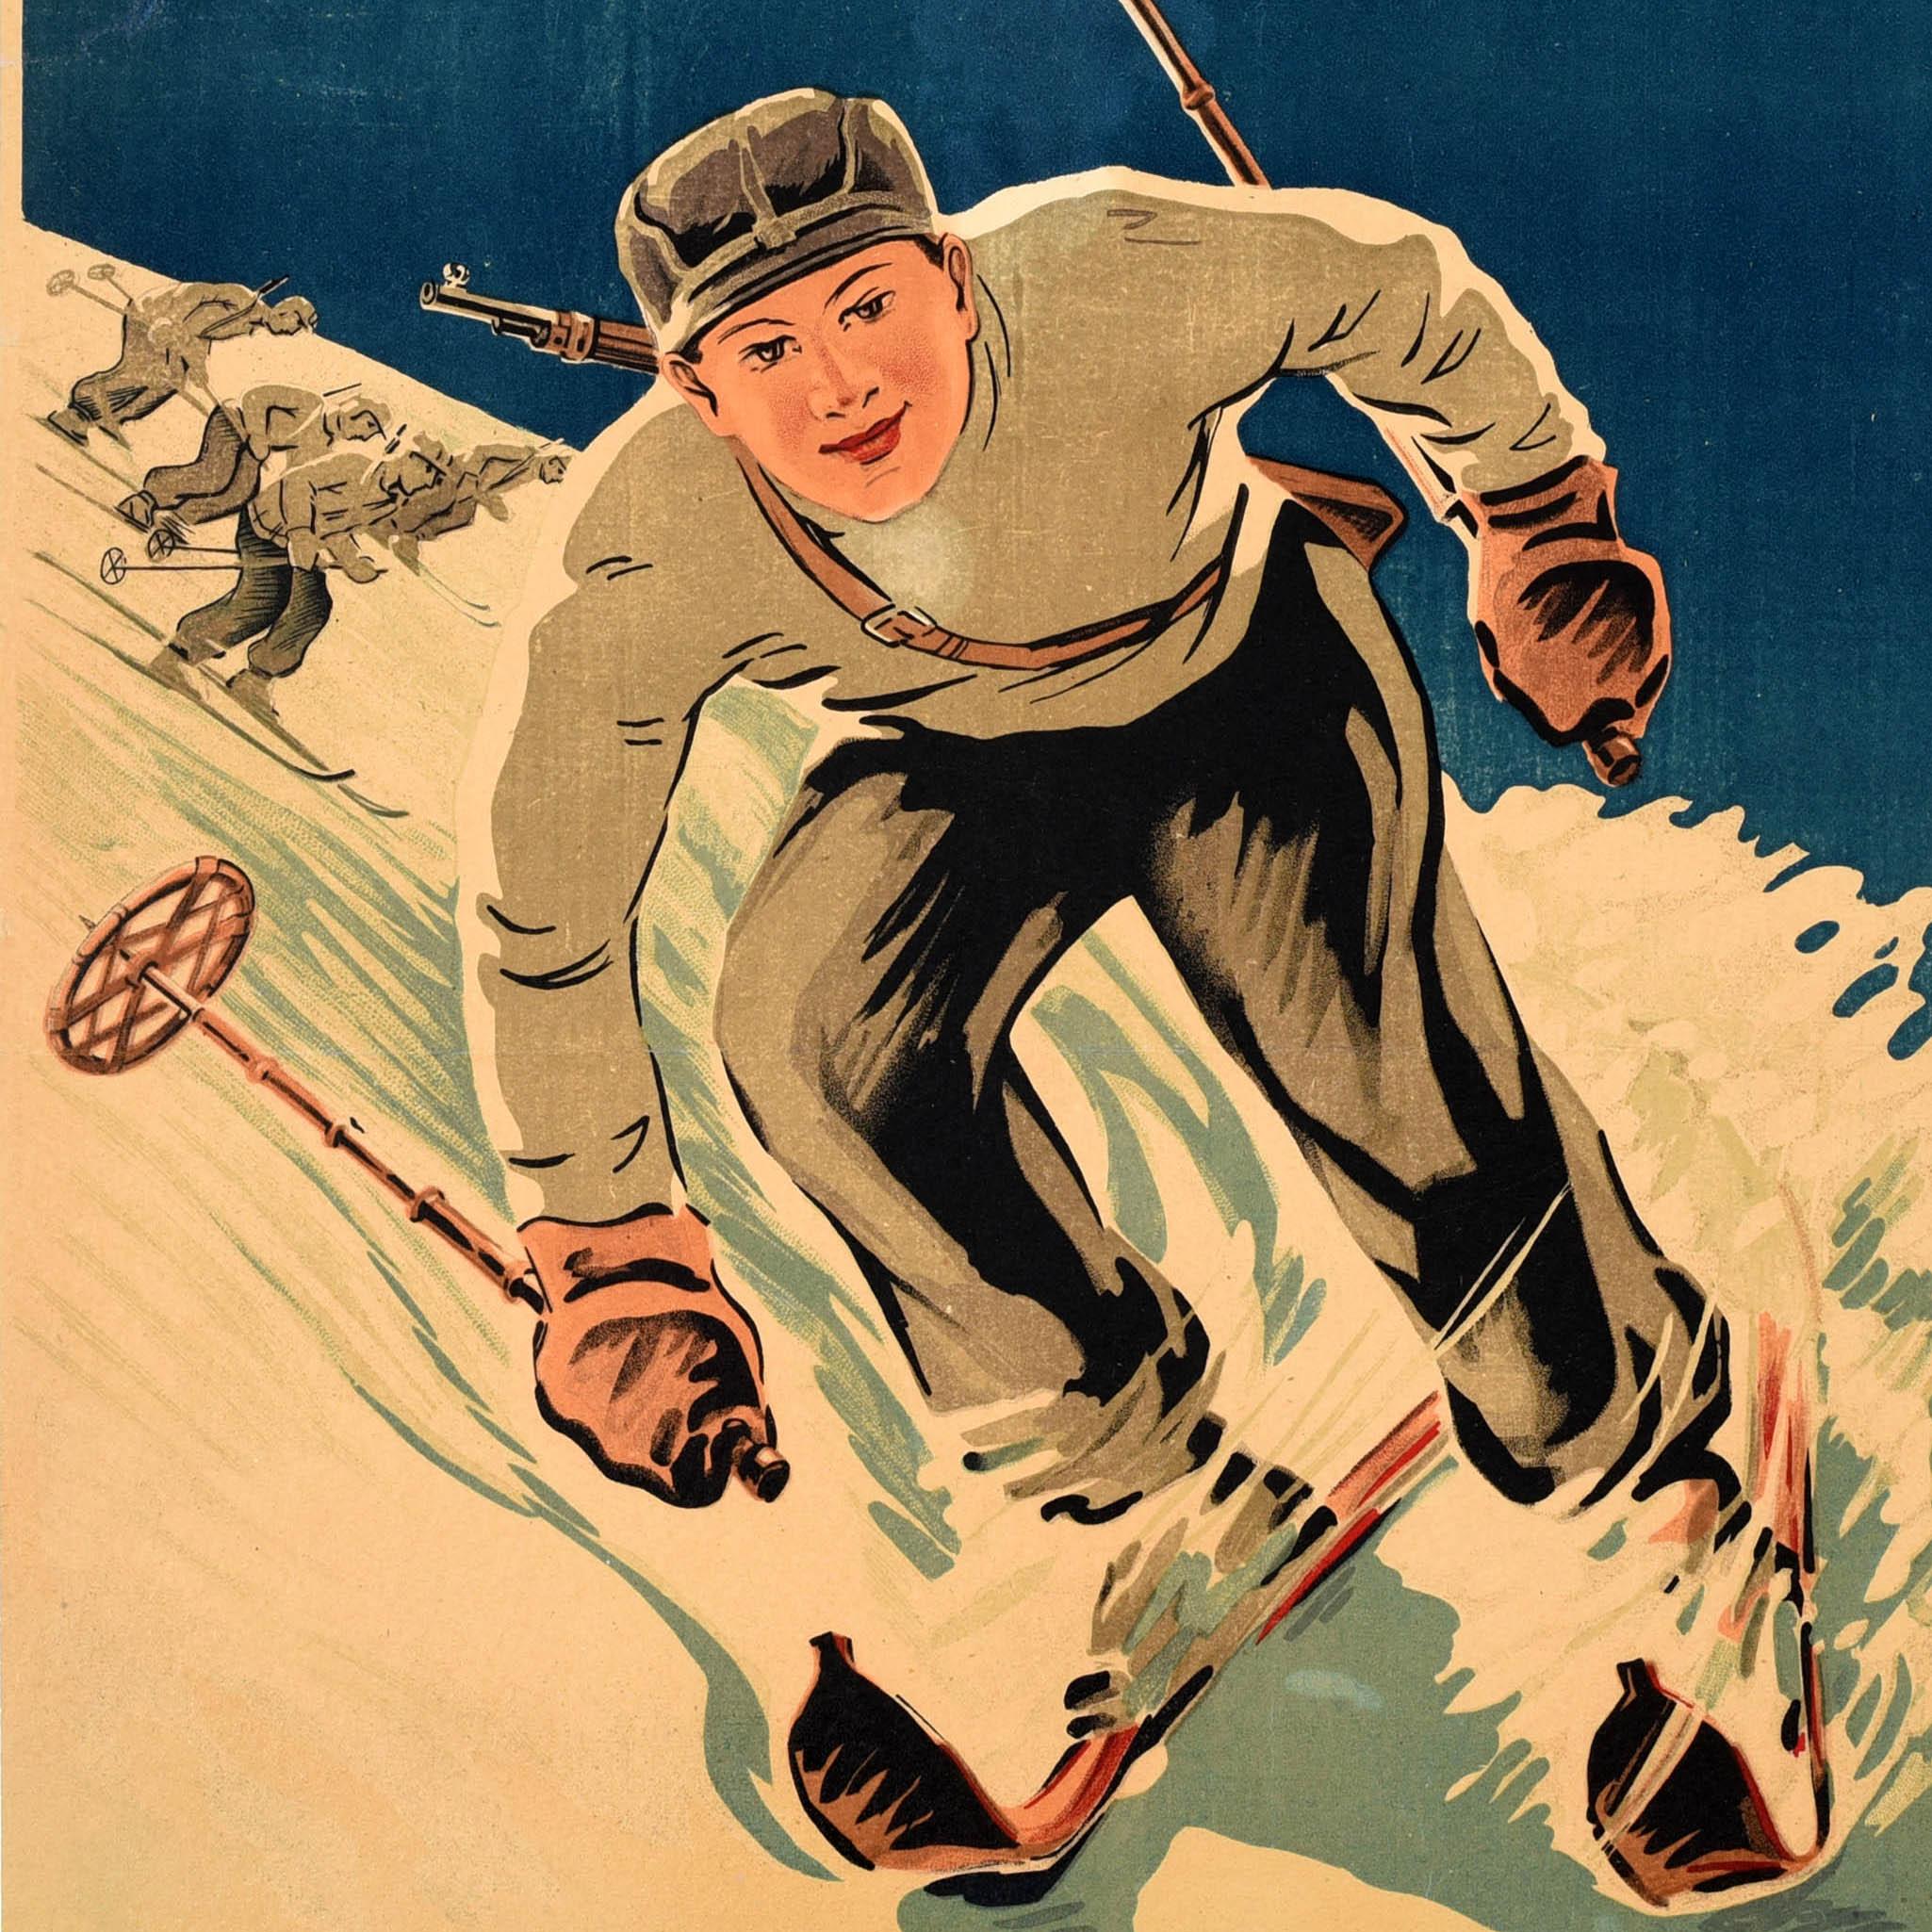 Original vintage Soviet poster for the All Union Voluntary Sports Society - Let's prepare new reserves of skiers for the Red Army! Dynamic artwork featuring a skier skiing towards the viewer at speed with the snow spraying up in front of other